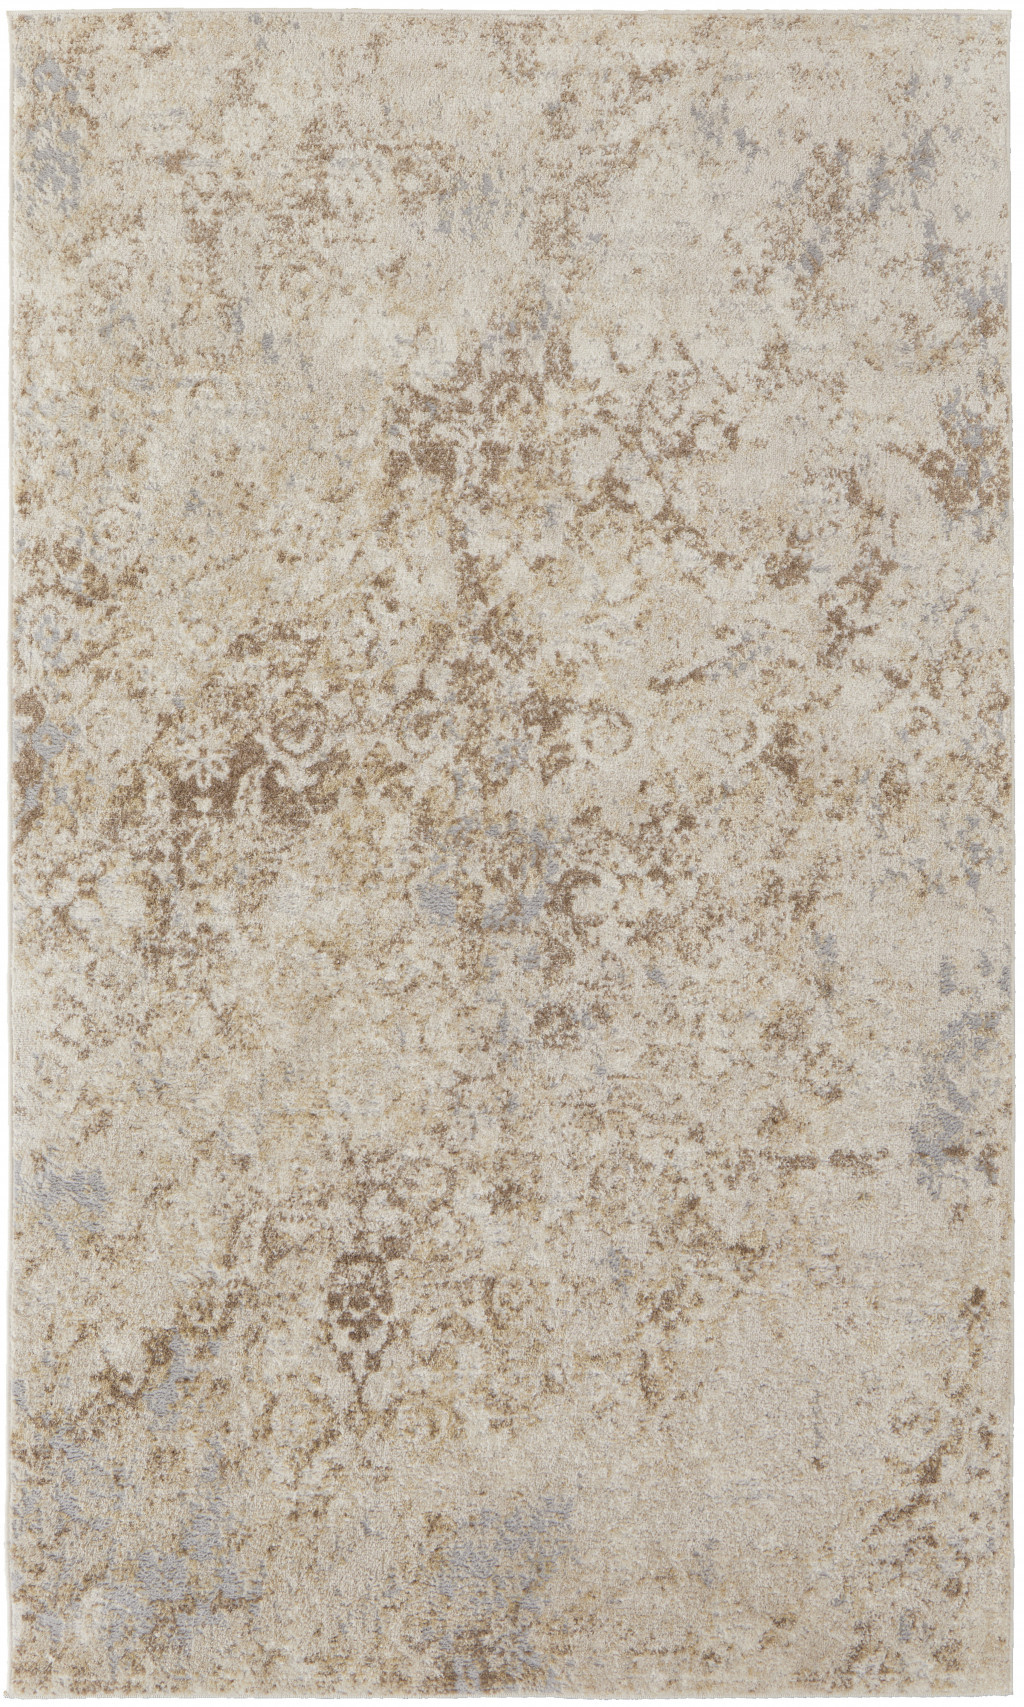 8' X 10' Tan And Ivory Abstract Power Loom Distressed Area Rug-513251-1